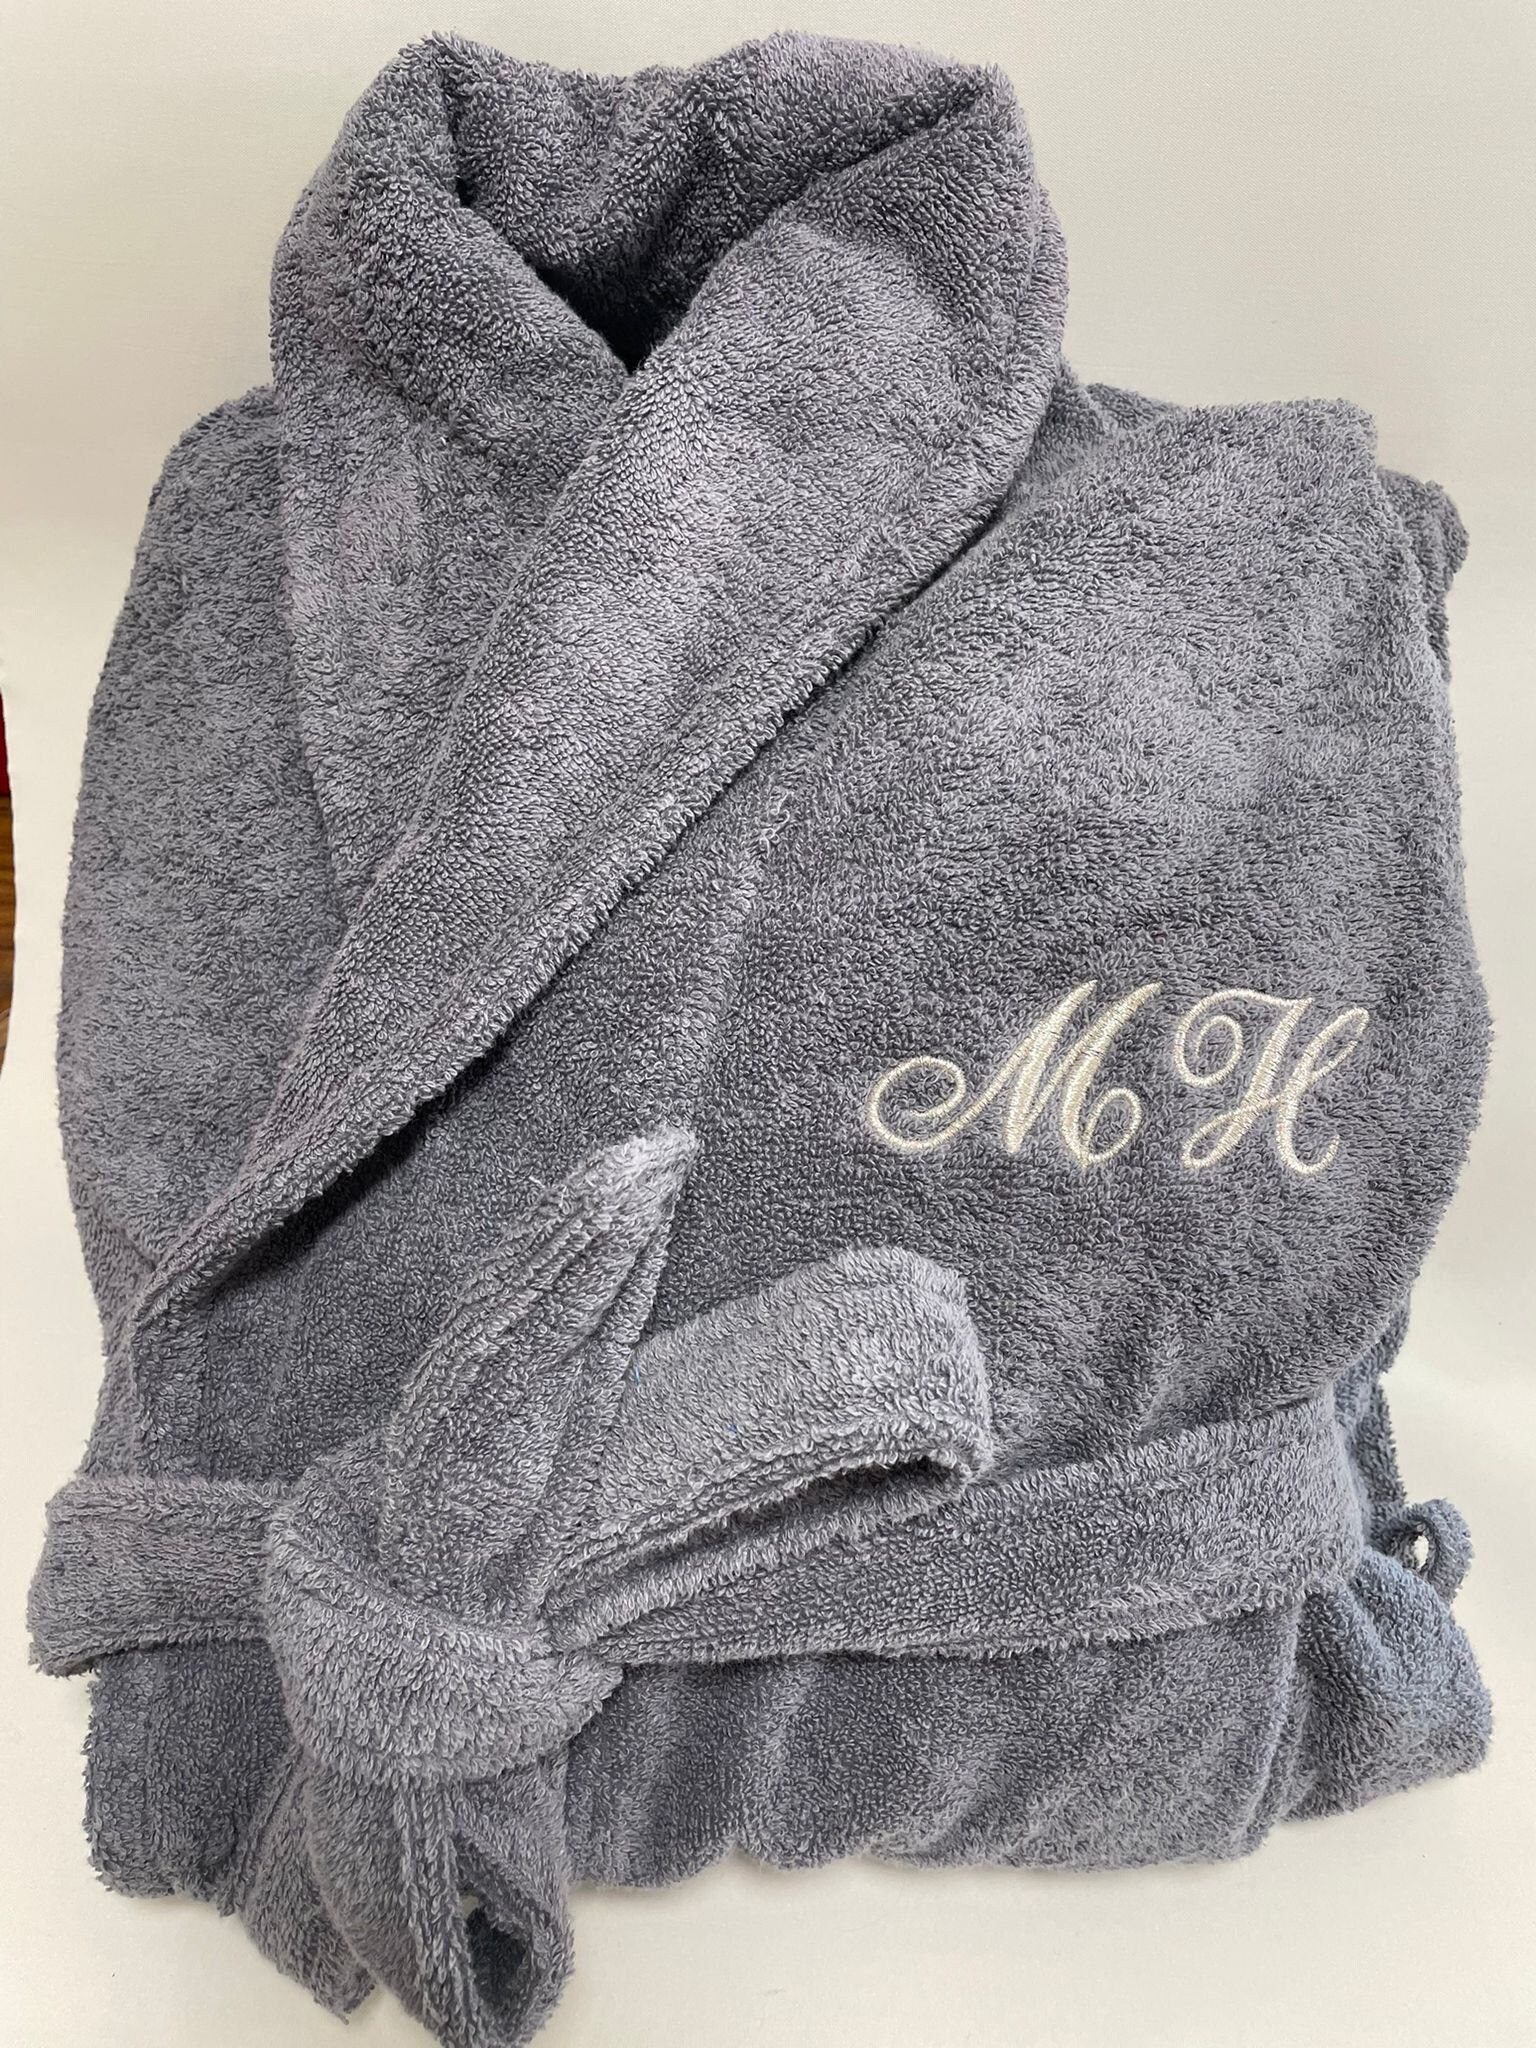 Personalised Mens/Ladies Bathrobe Towelling Robe Luxurious Soft Cotton Embroidered With Name Christmas Gift Birthday Unique Xmas Gift